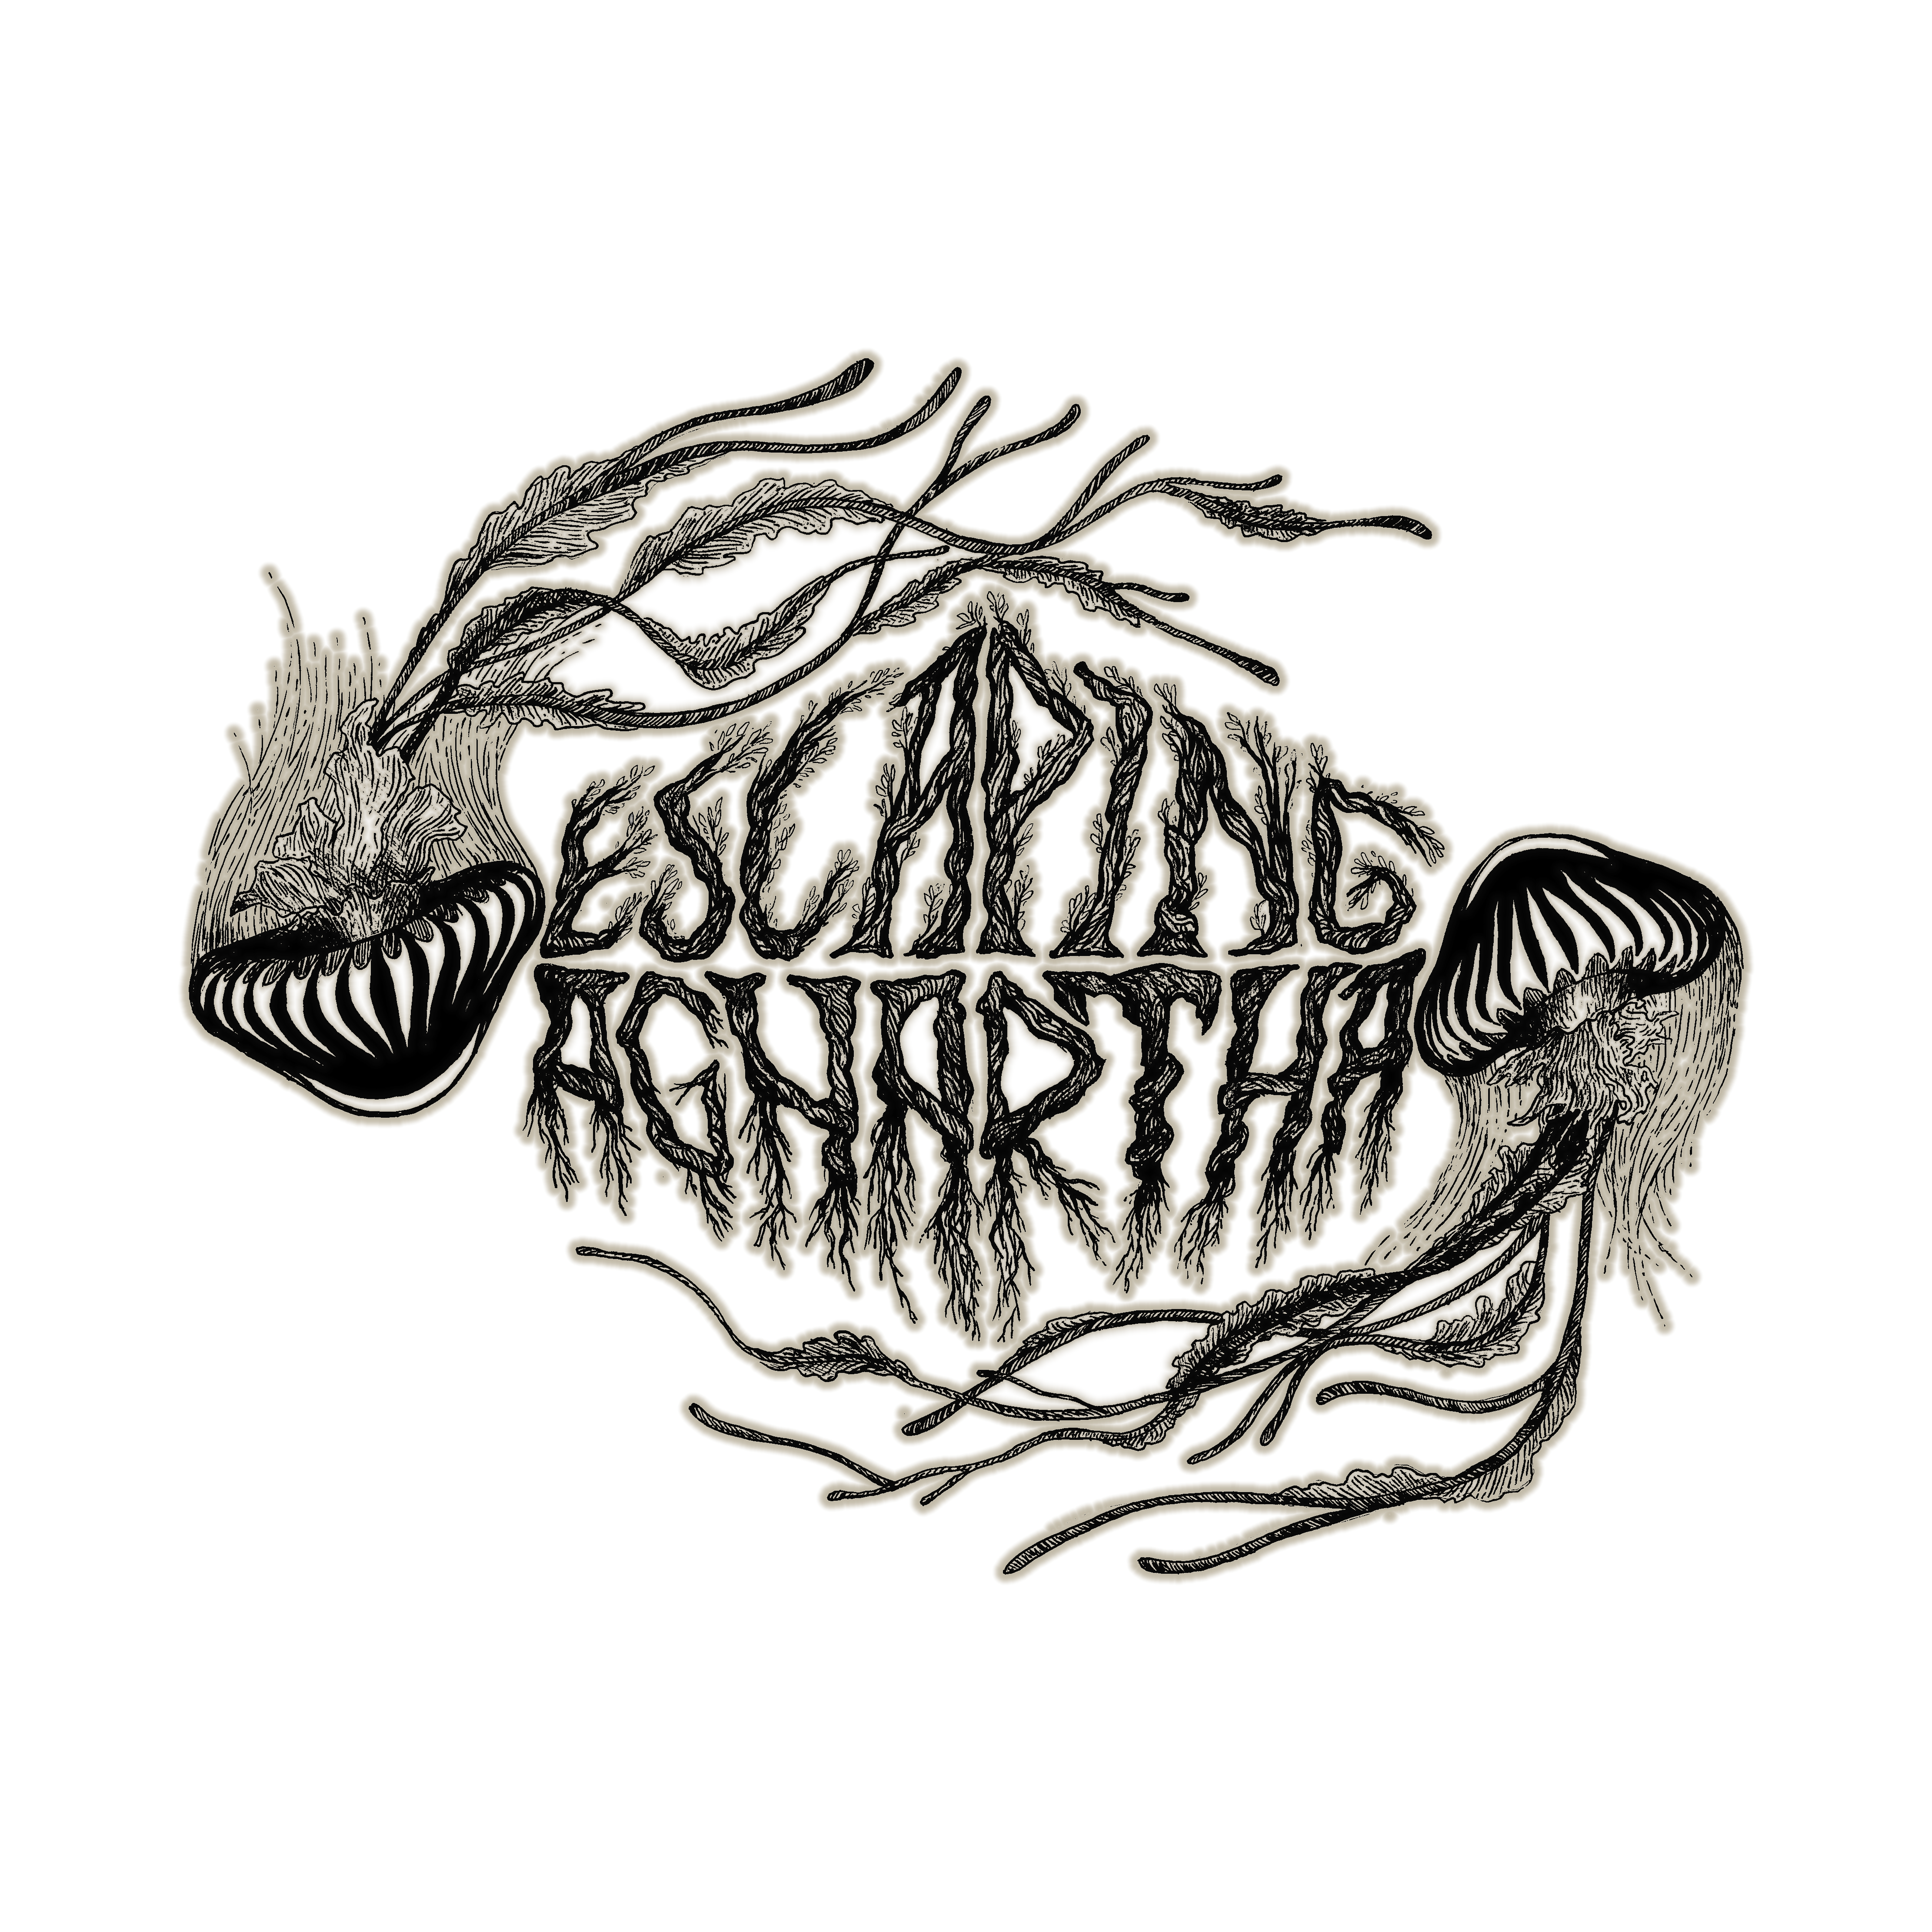 Metal band Escaping Aghartha supports amphibian conservation!